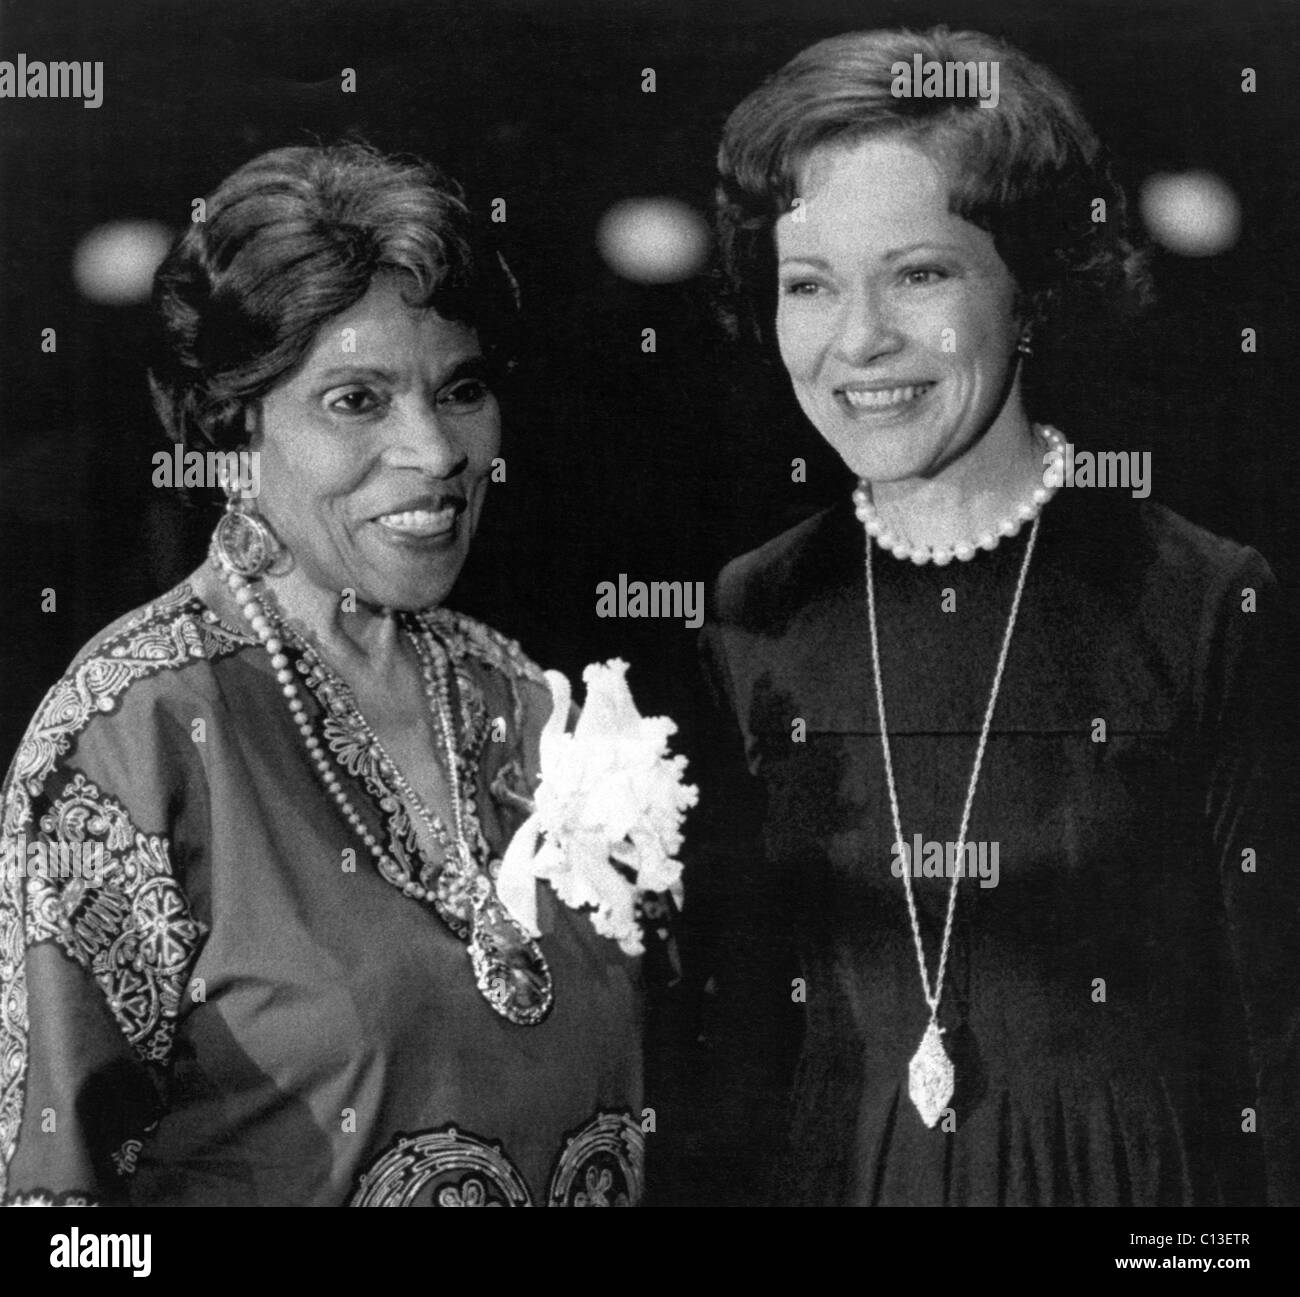 From left: Marian Anderson and First Lady Rosalynn Carter at the 75th birthday tribute concert during which the singer was presented with the gold medal that Congress awarded her. Carnegie Hall, New York City, February 27, 1977 Stock Photo